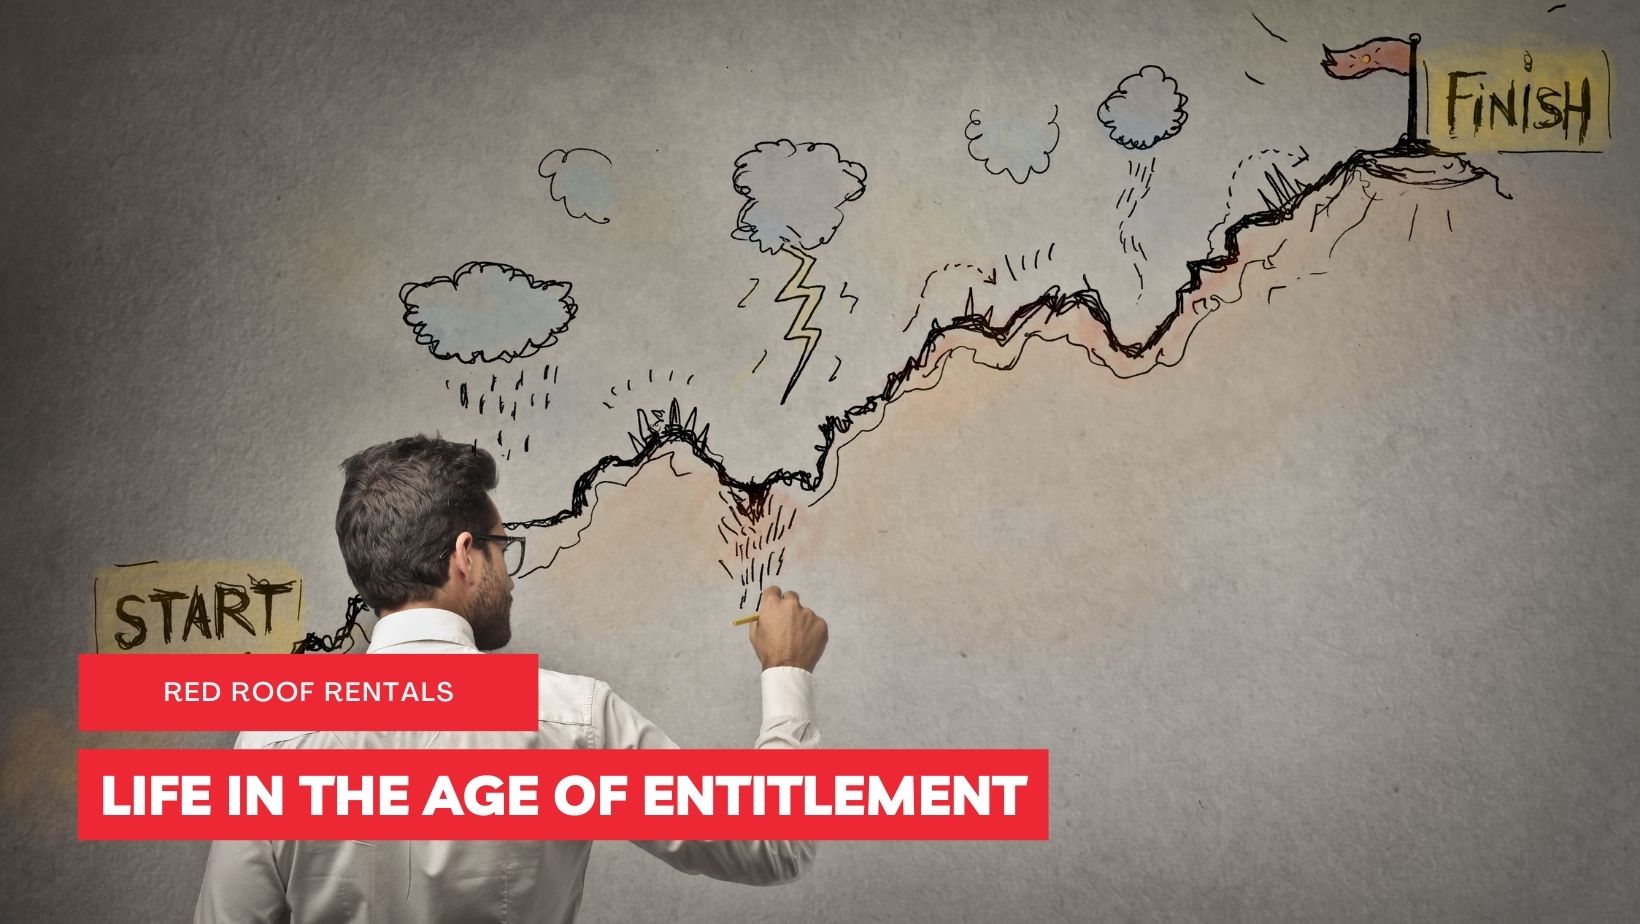 LIFE IN THE AGE OF ENTITLEMENT